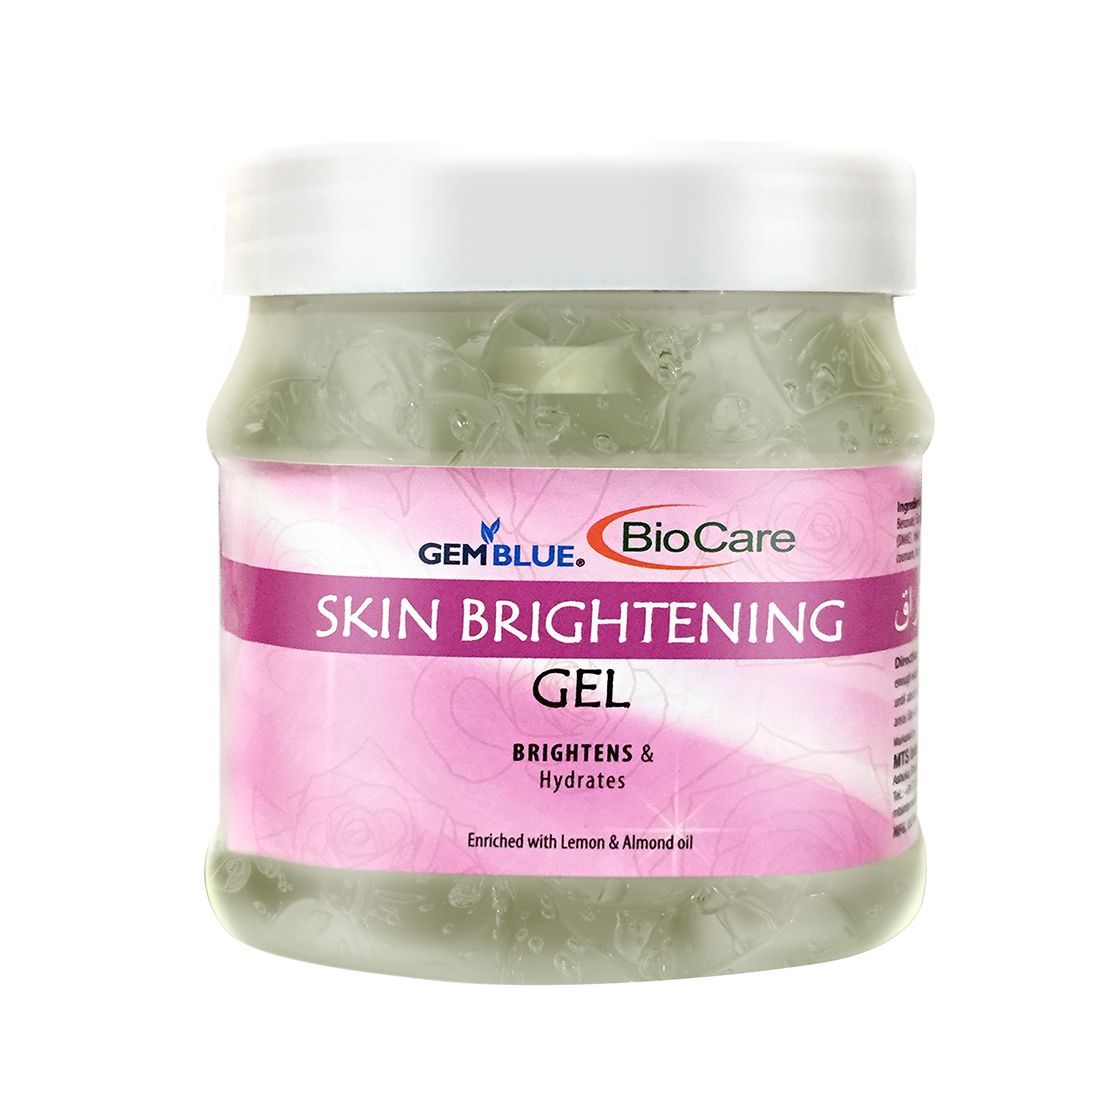 Buy GEMBLUE BioCare Skin Brightening Face and Body Gel - Purplle